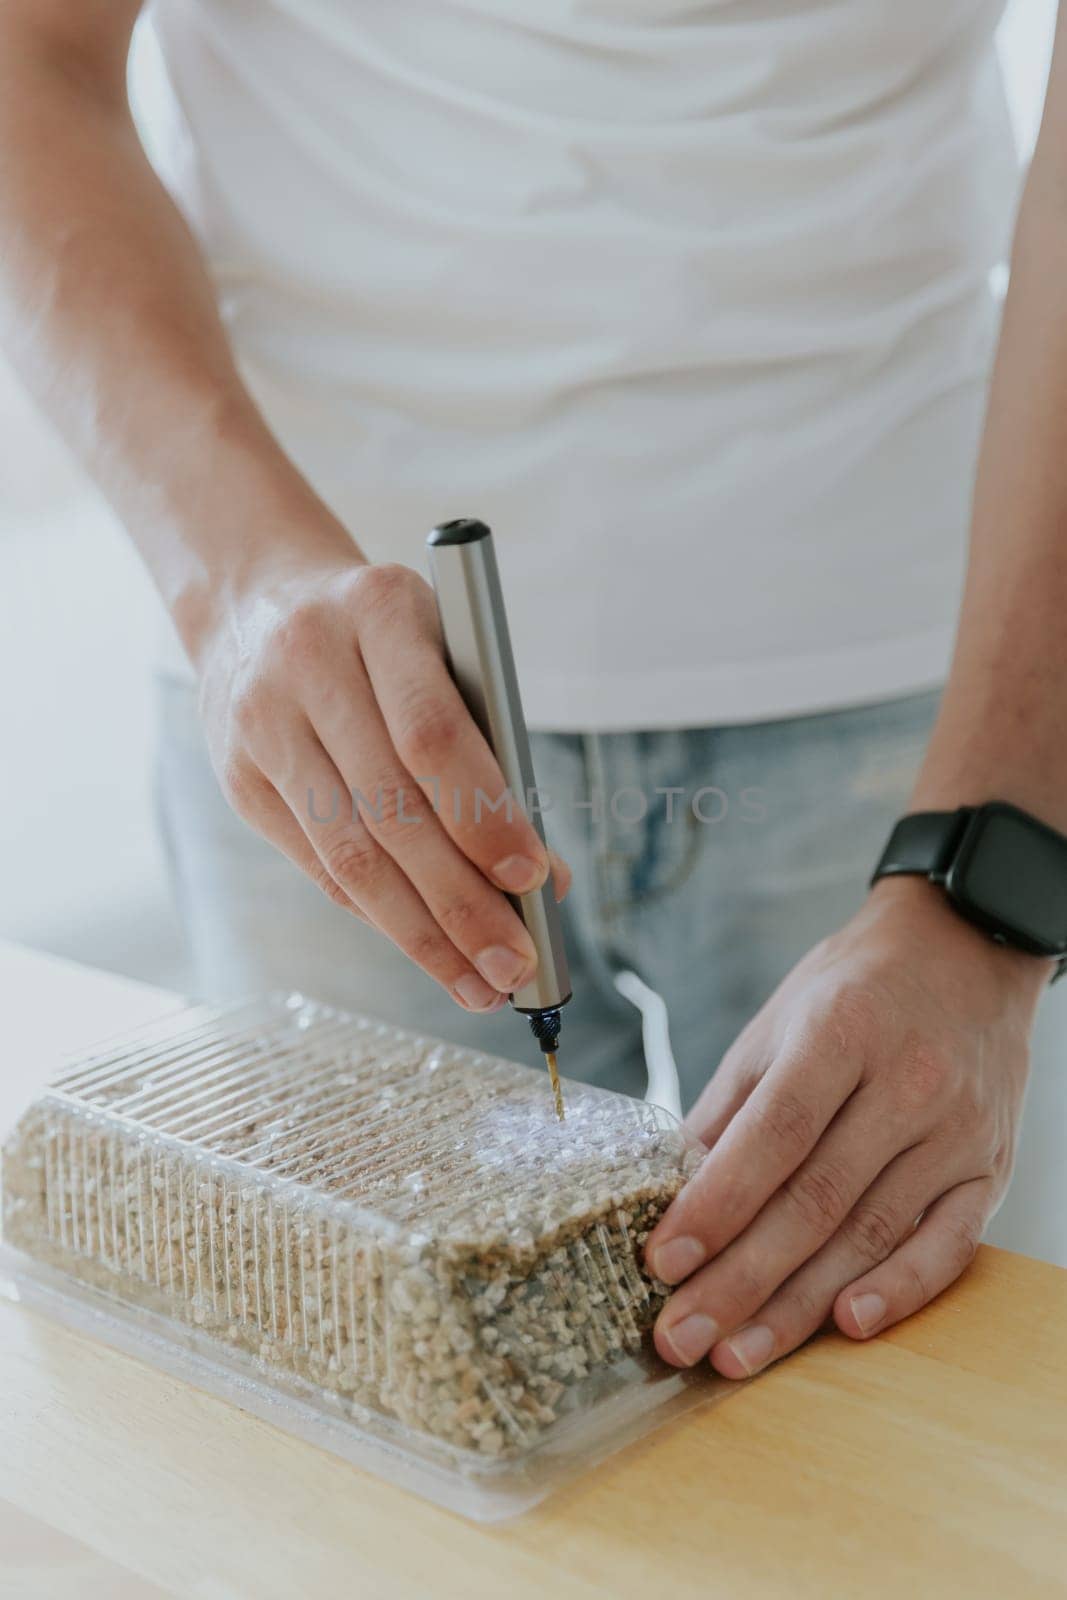 One young Caucasian unrecognizable man drills a plastic transparent box with filler for planting wheat with a mini-drill, standing in the kitchen at a wooden table, close-up view from below.